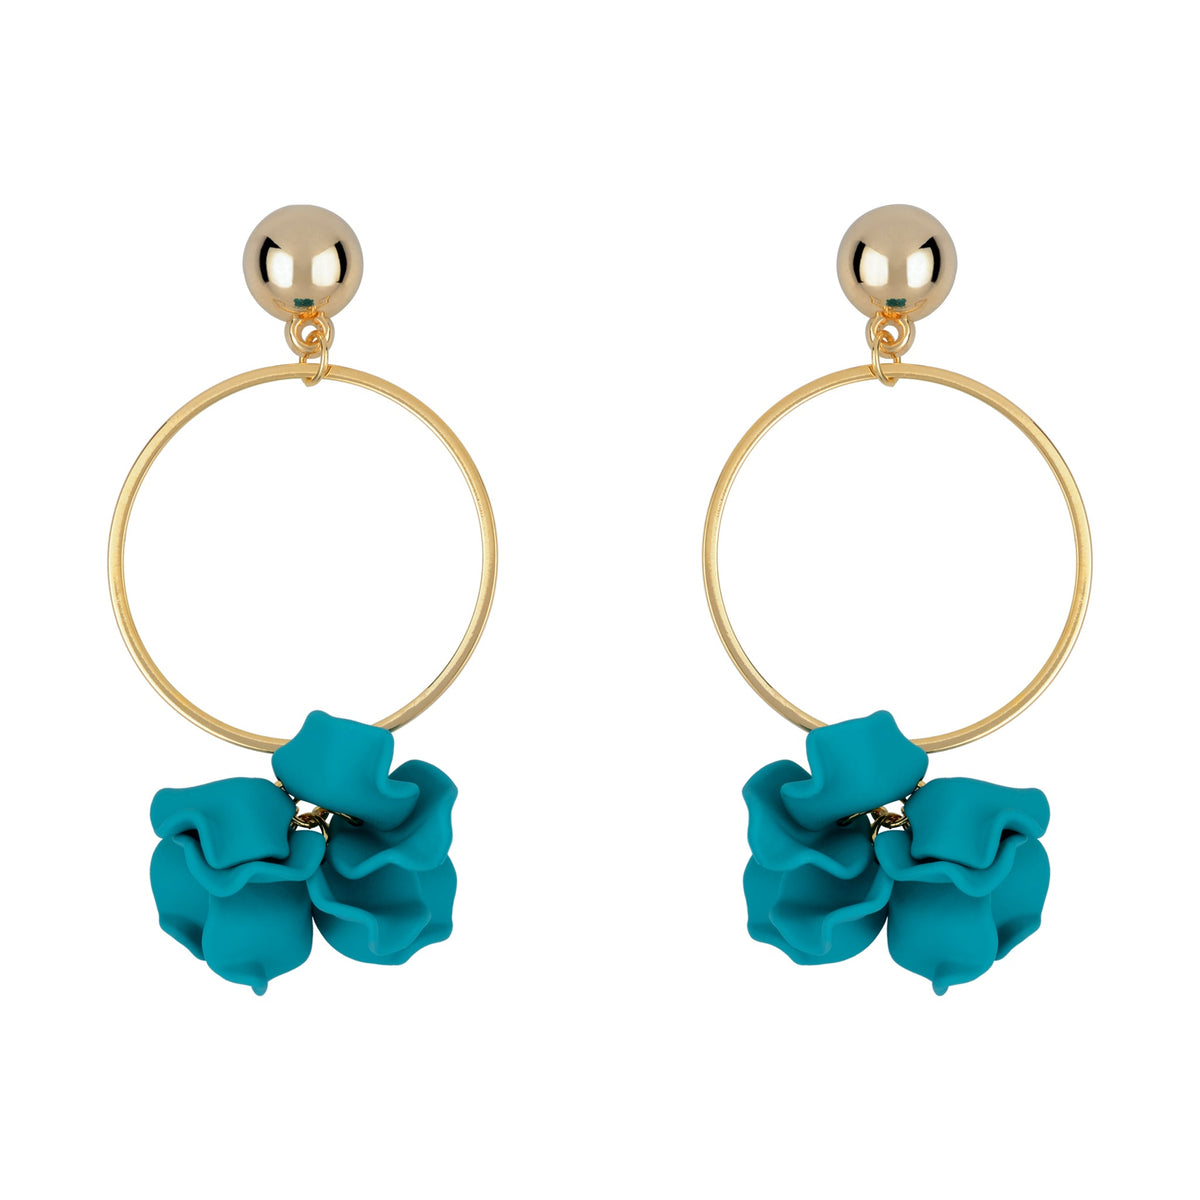 Suspended Gold Ring Petal Earrings - Turquoise